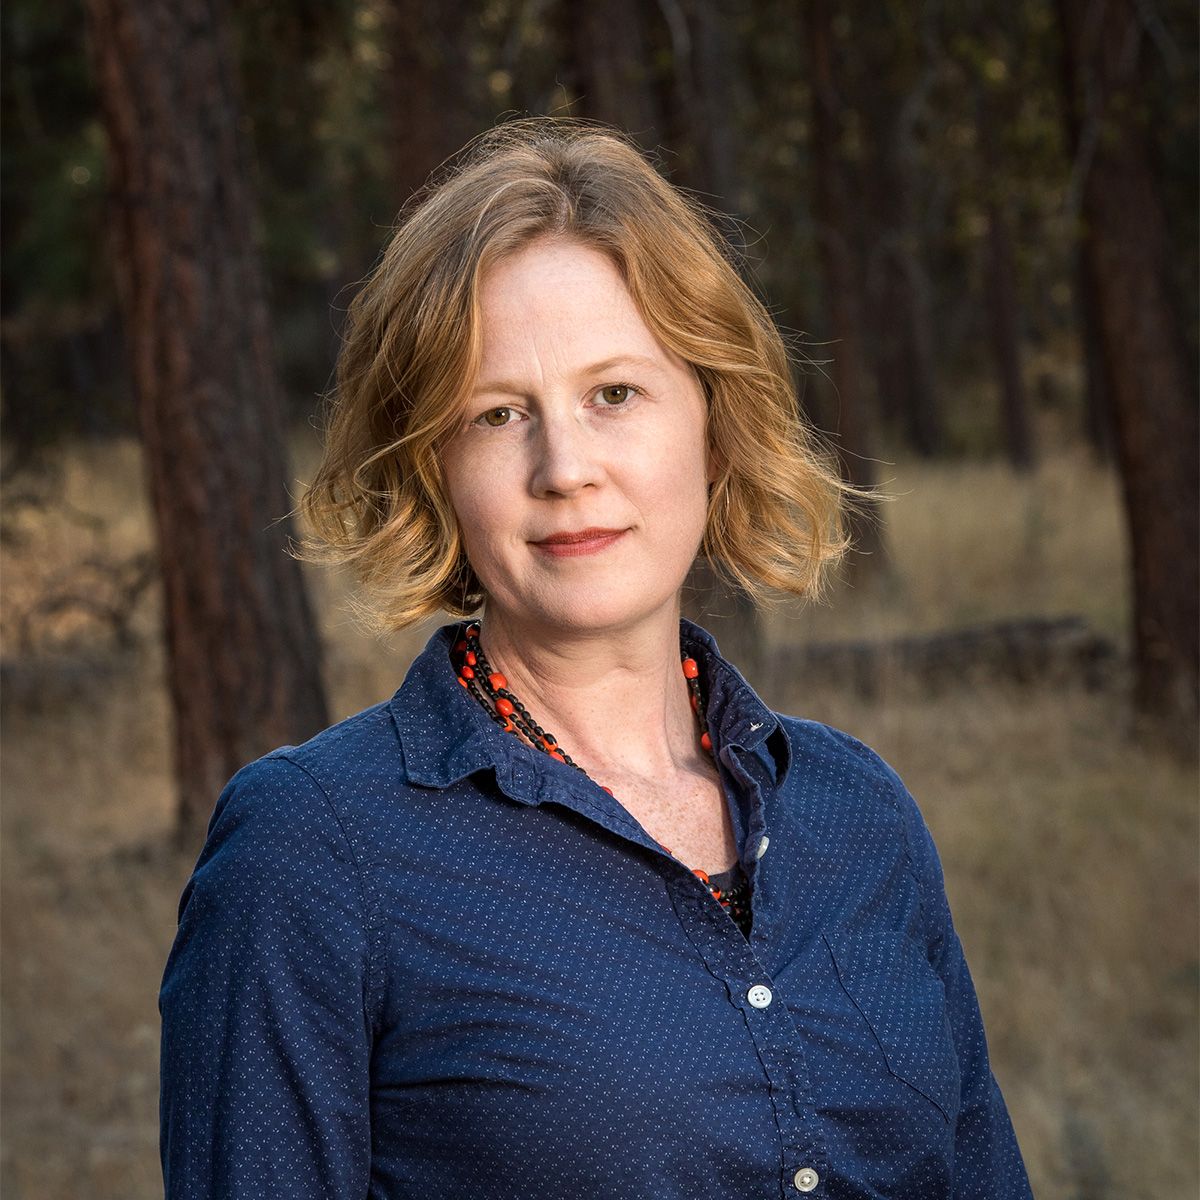 A photo of author Emma Marris standing in front of a forest, wearing a blue button-up shirt and looking at the camera